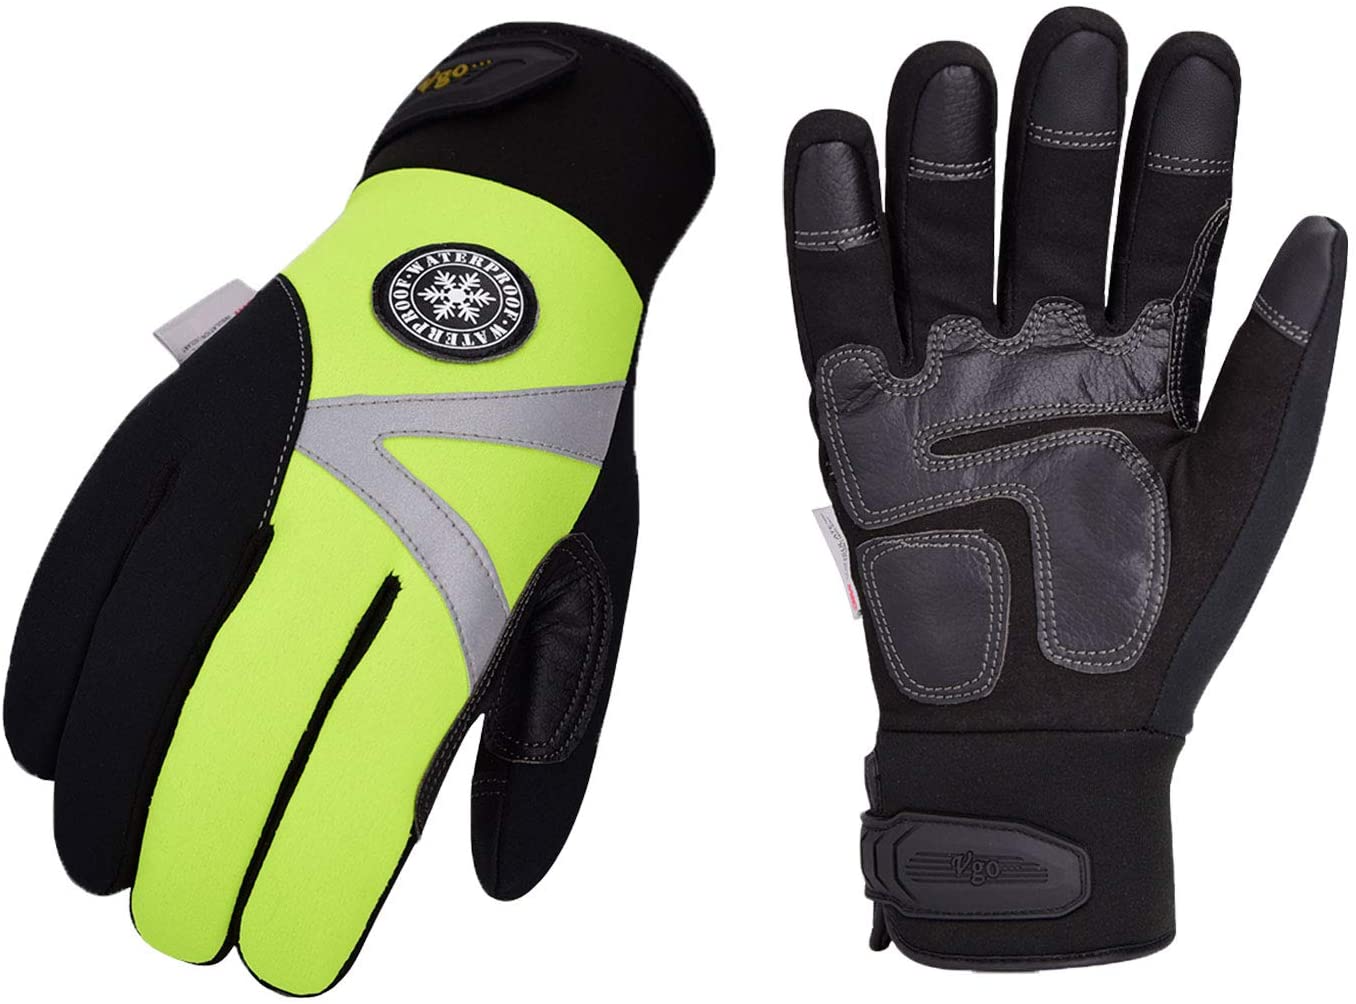 Vgo-Thinsulate-C100-Lined-Synthetic-Leather-Winter-Warm-Work-Gloves-Heavy-duty-winter-work-gloves